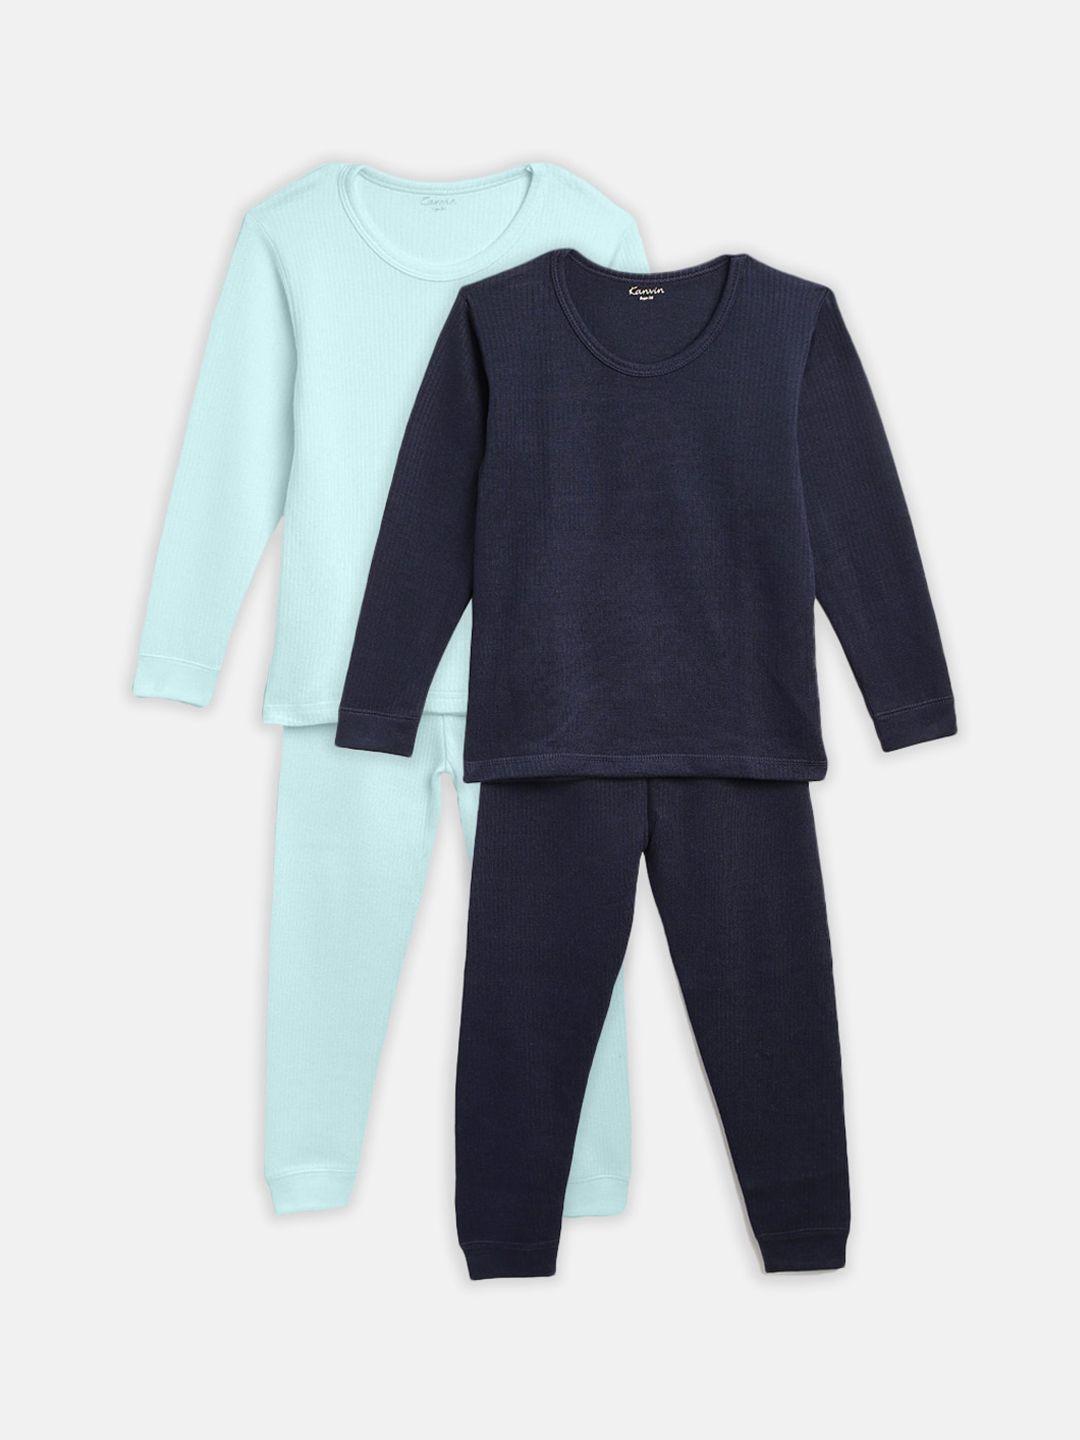 kanvin boys pack of 2 turquoise & navy thermal set